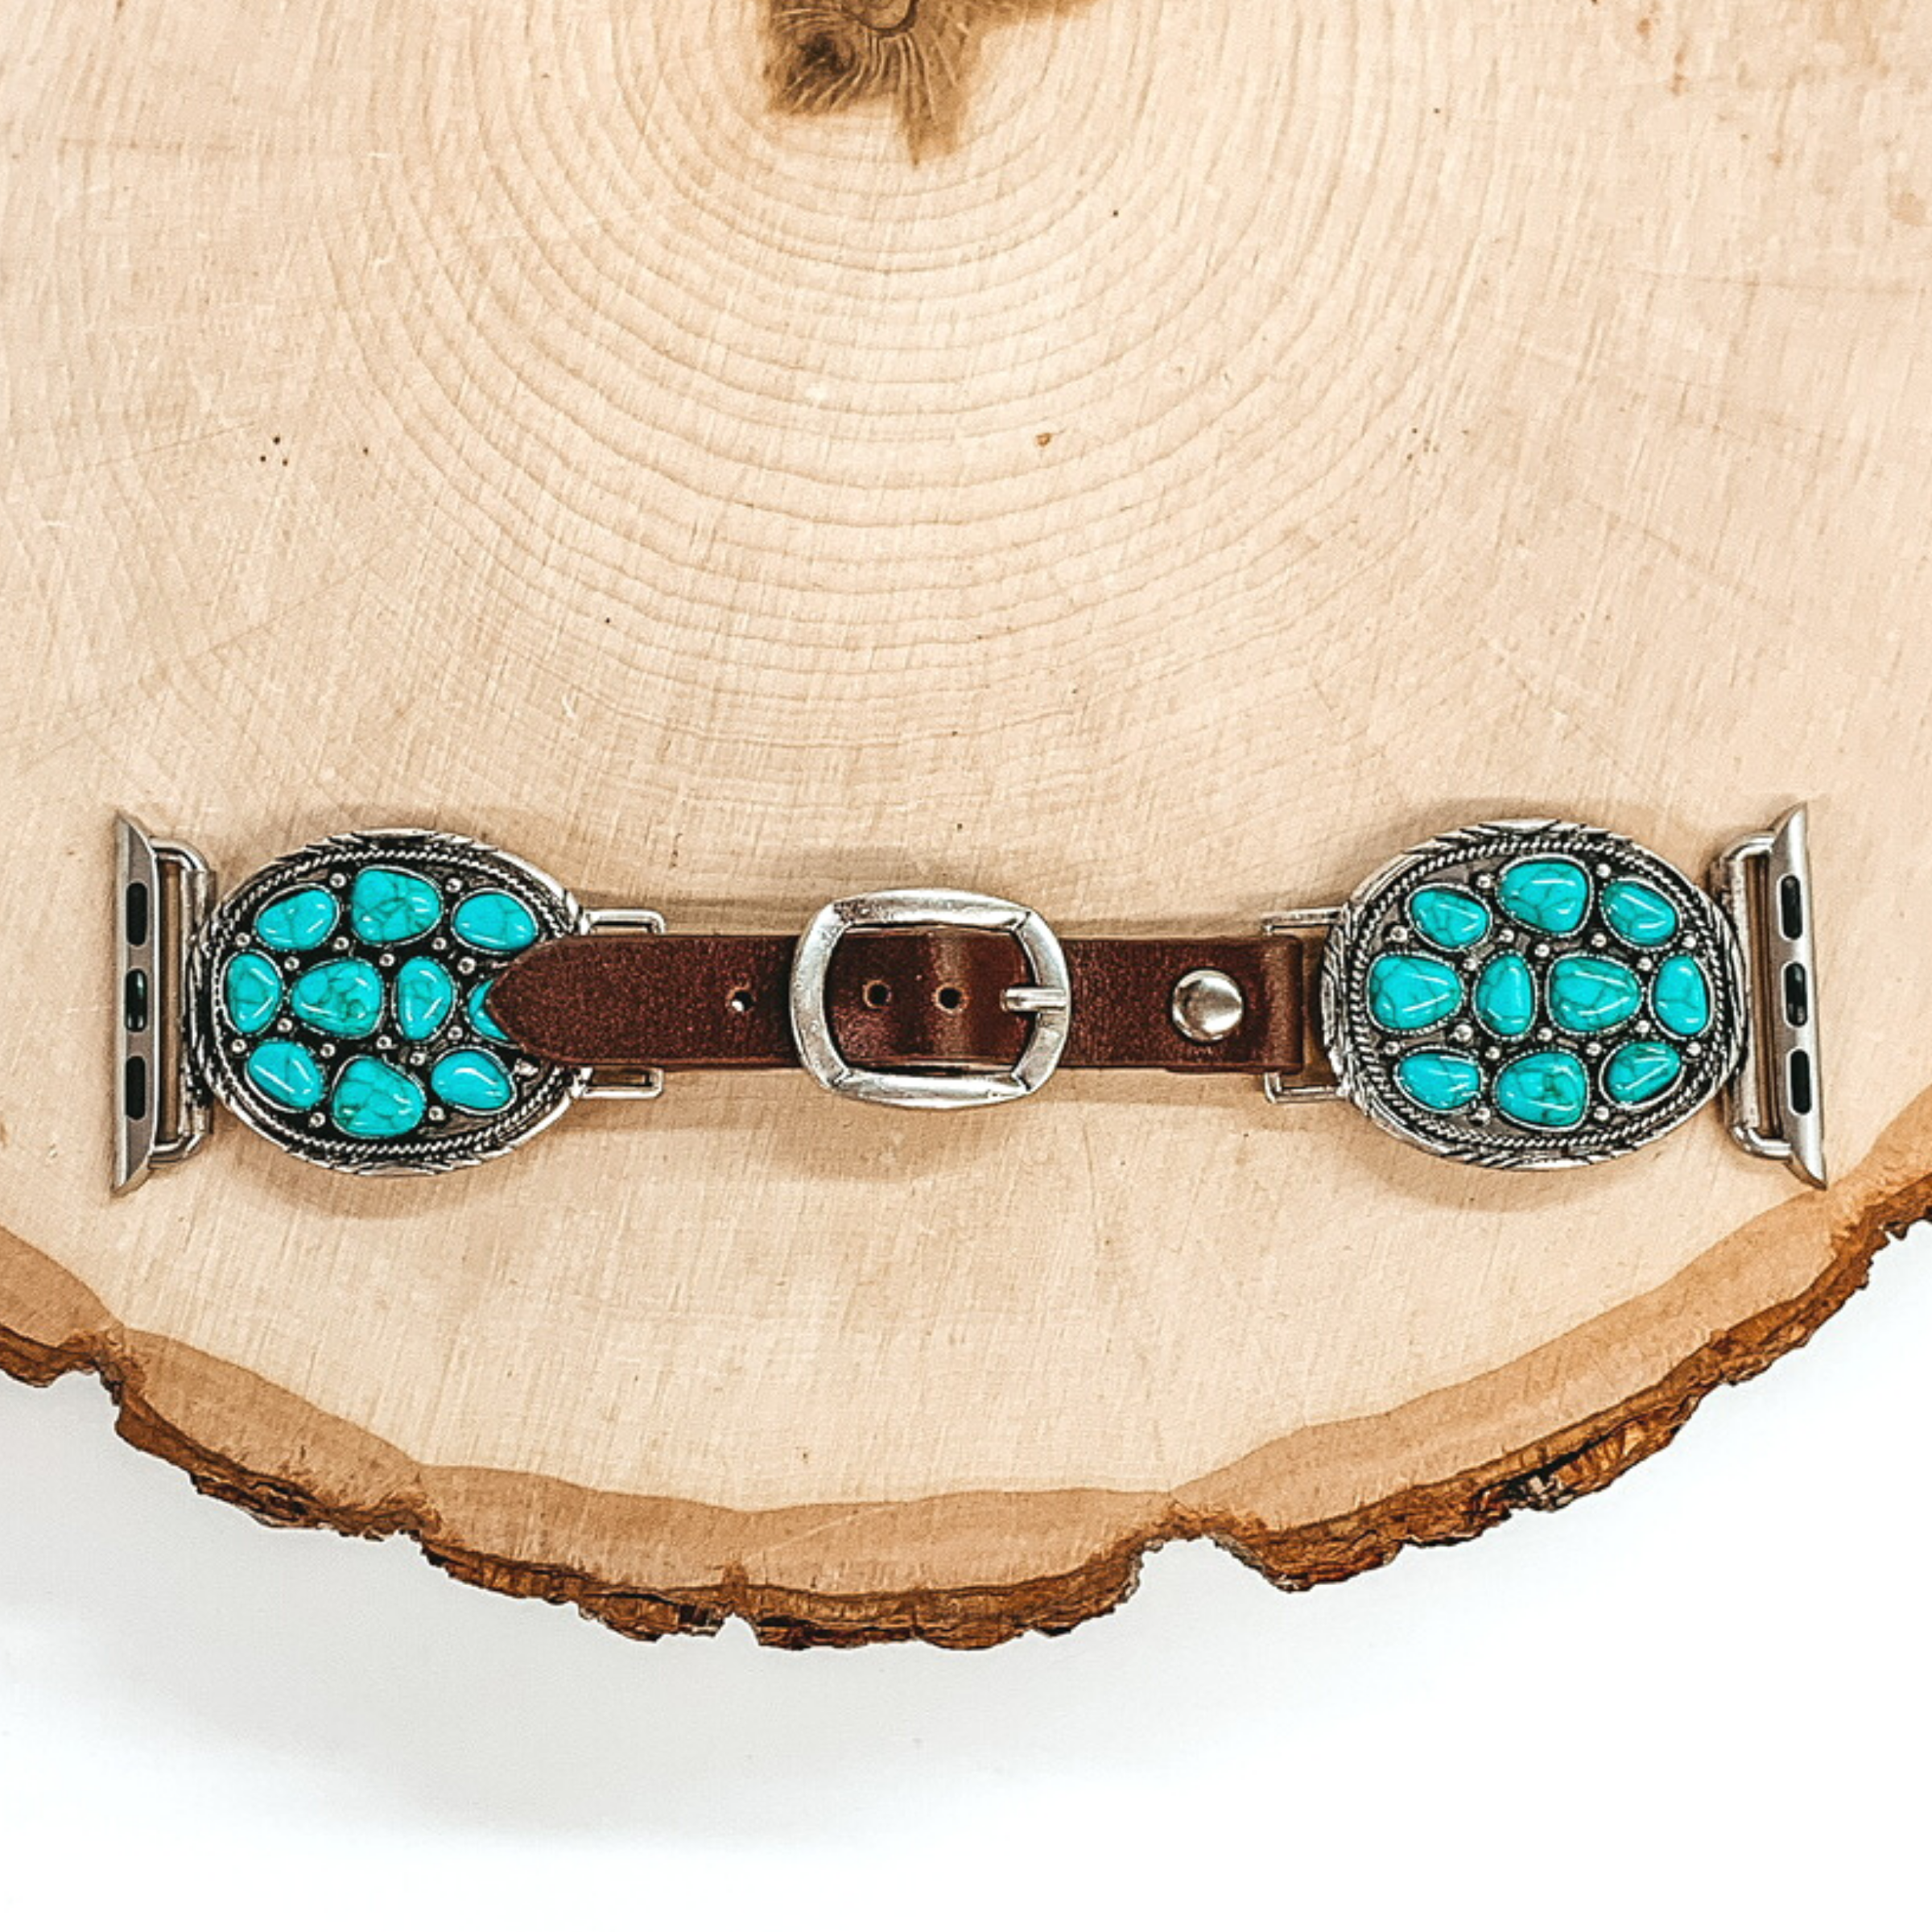 Dark Brown watch band with silver, oval pendant ends with Apple watch band acessories. The oval pendant has irregular shaped turquoise stones. This watch band is pictured on a piece of wood on a white background. 